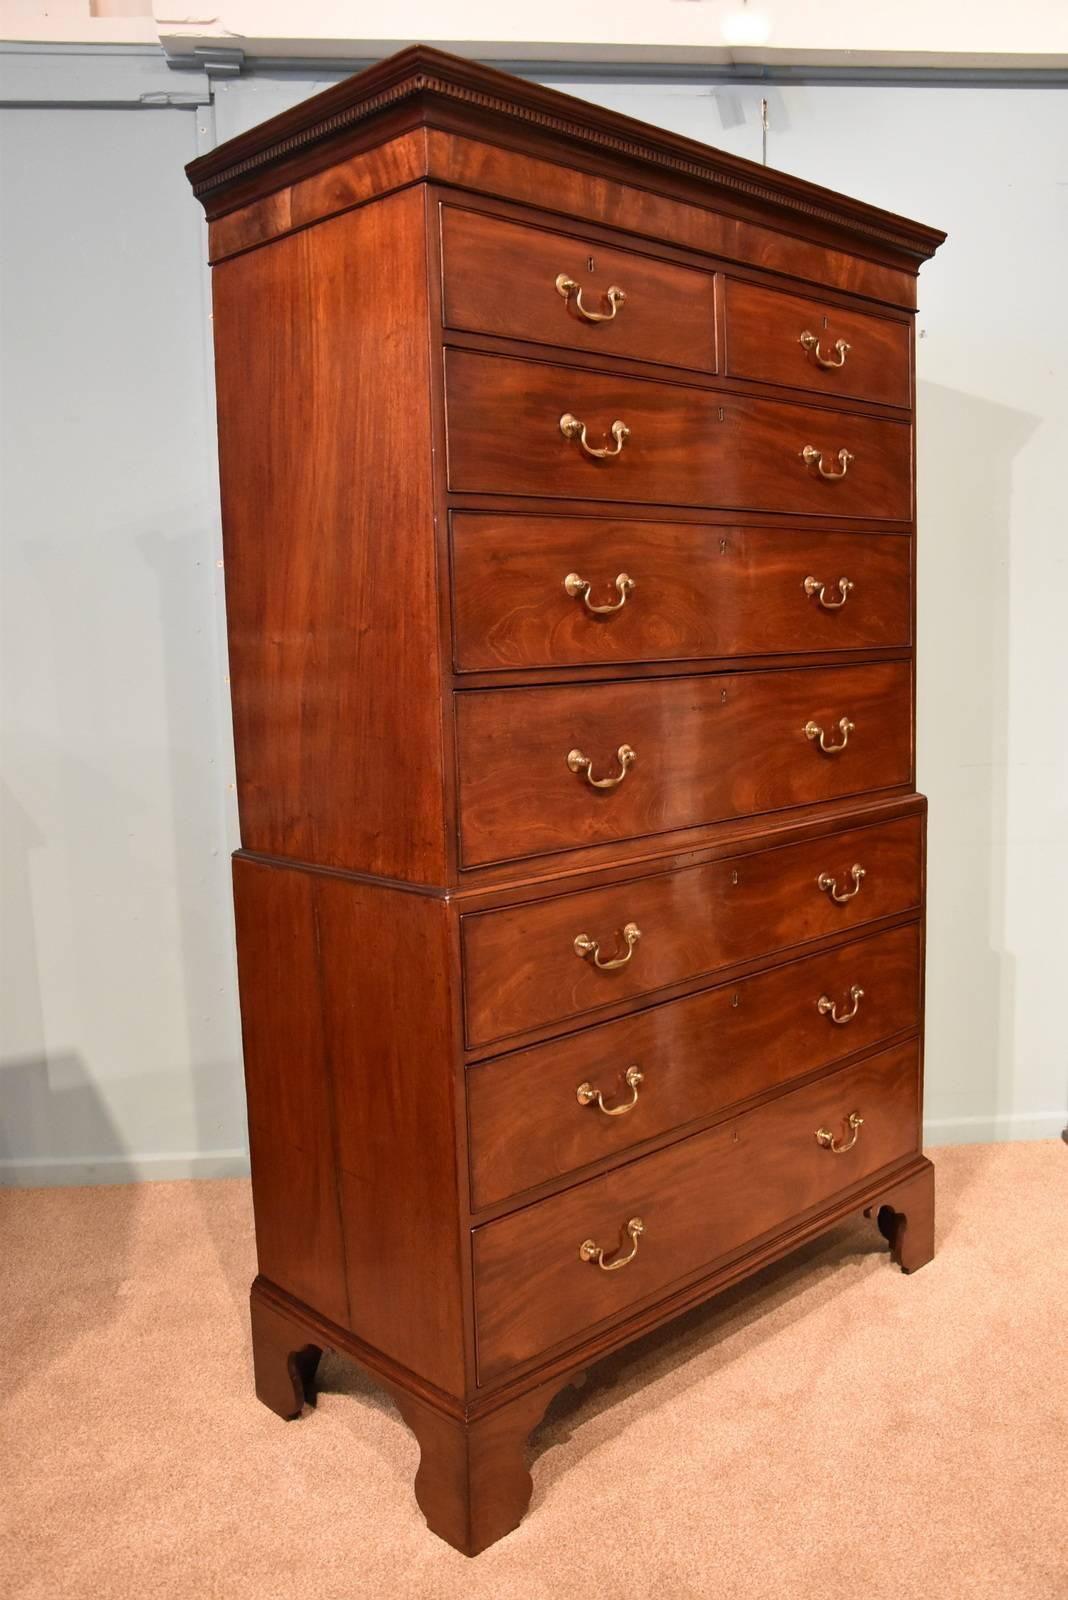 A good late 18th century mahogany chest on chest of superb color.

Dimensions:
Height 75